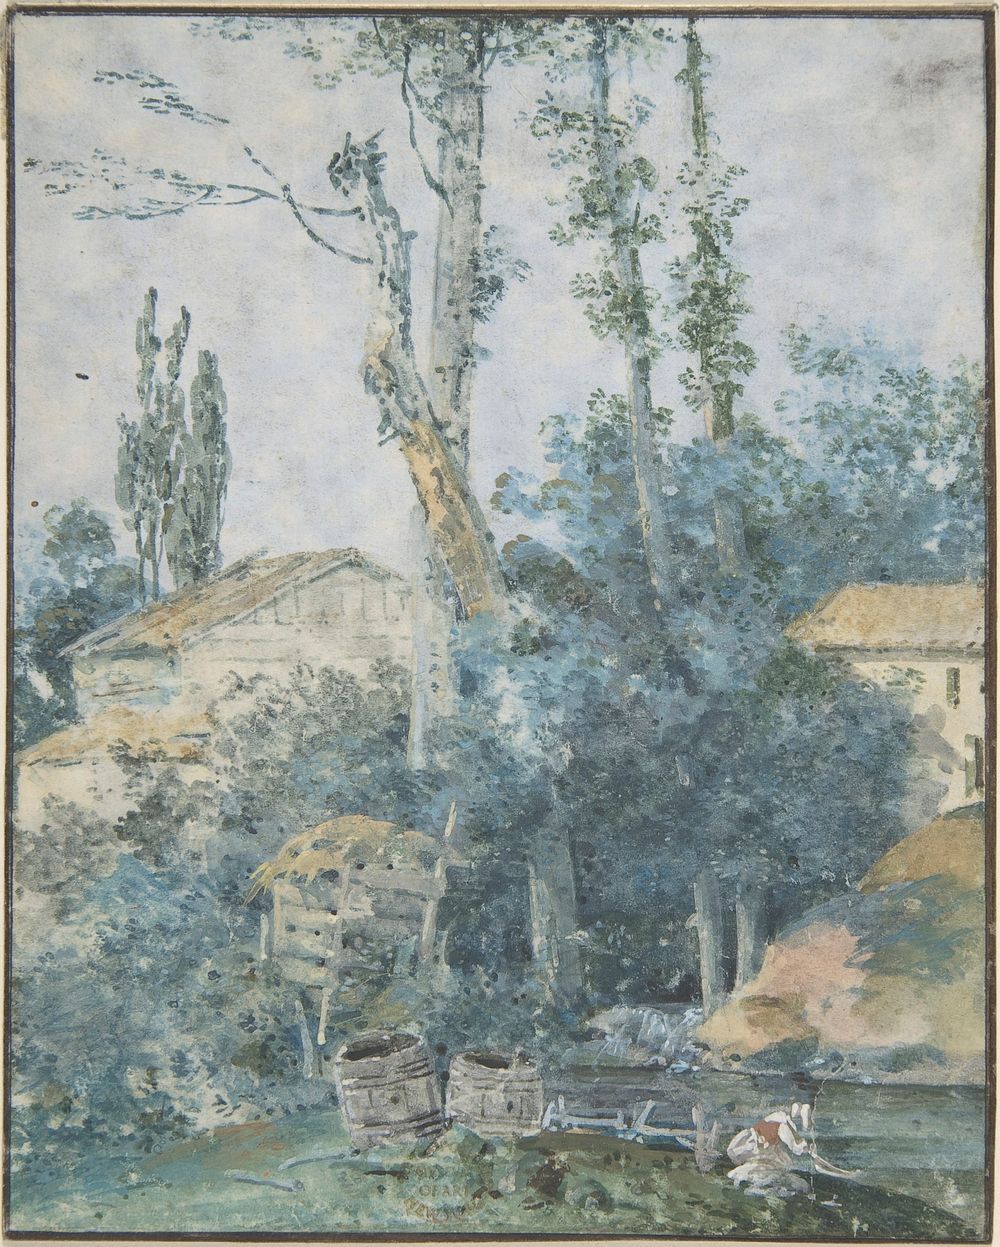 Rustic Scene – A Woman Washing Clothes in a Stream, Anonymous, French, 18th century